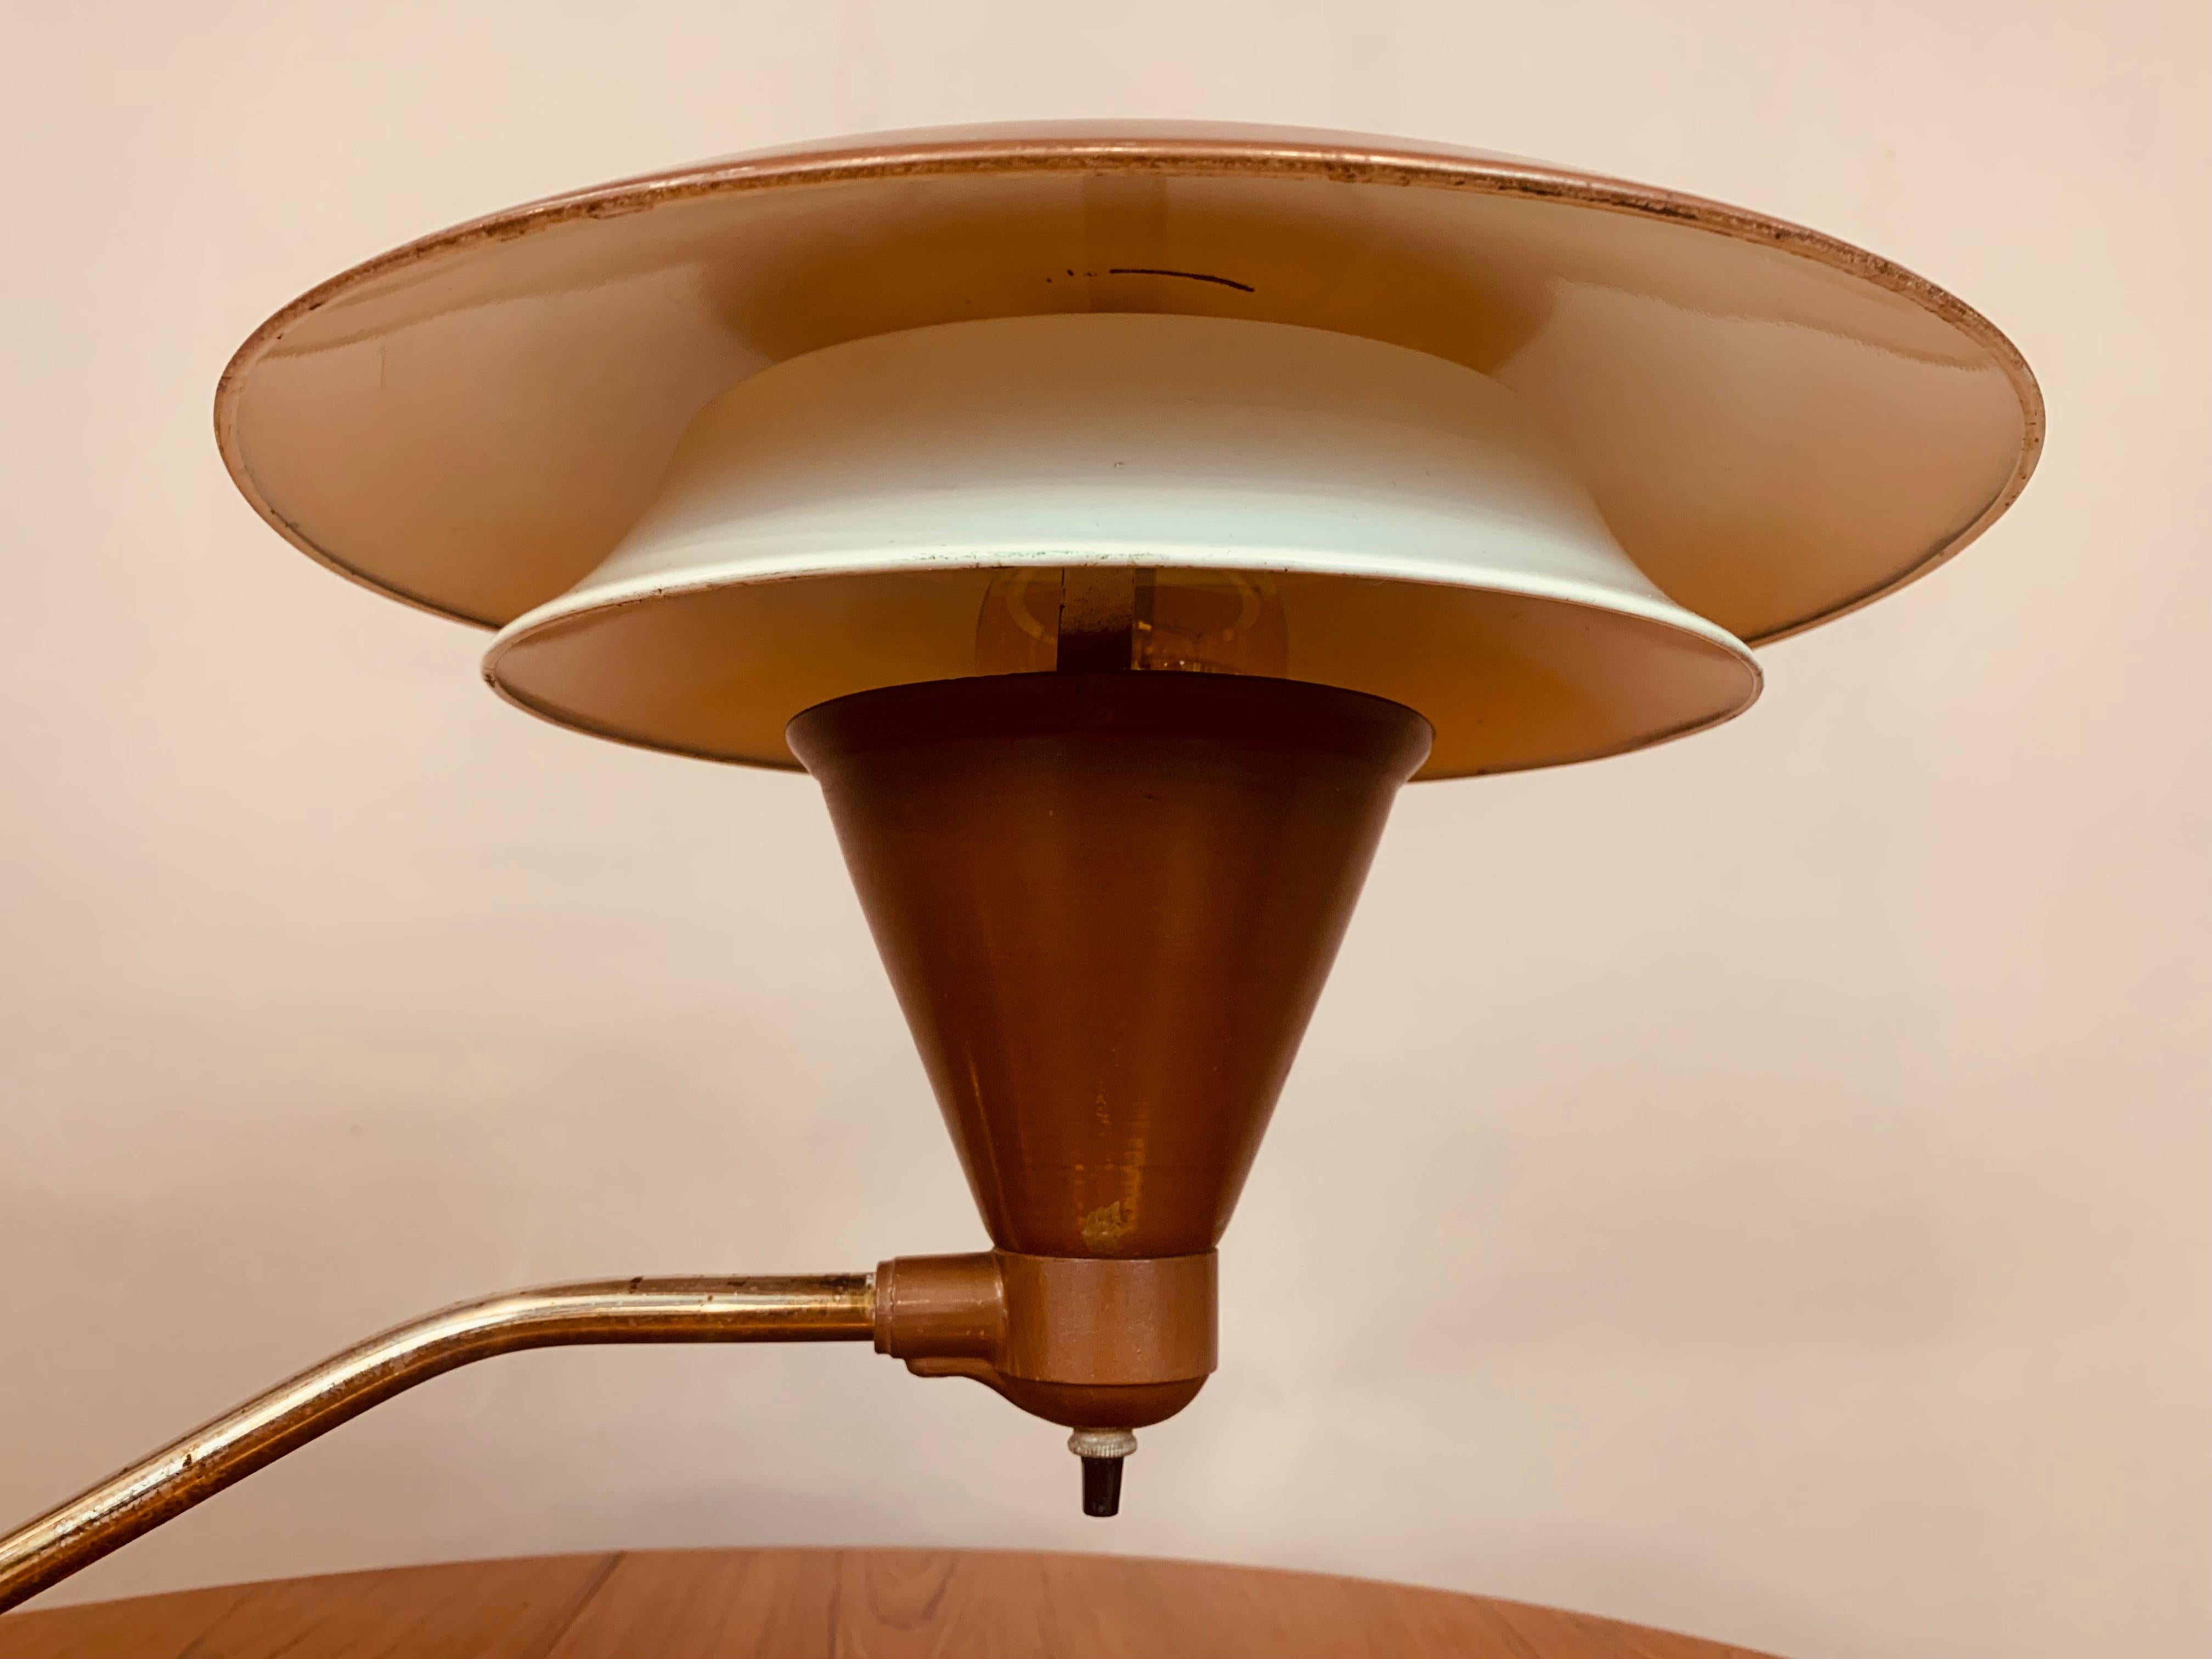 1950s Art Speciality Co Flying Saucer Desk Lamp 7